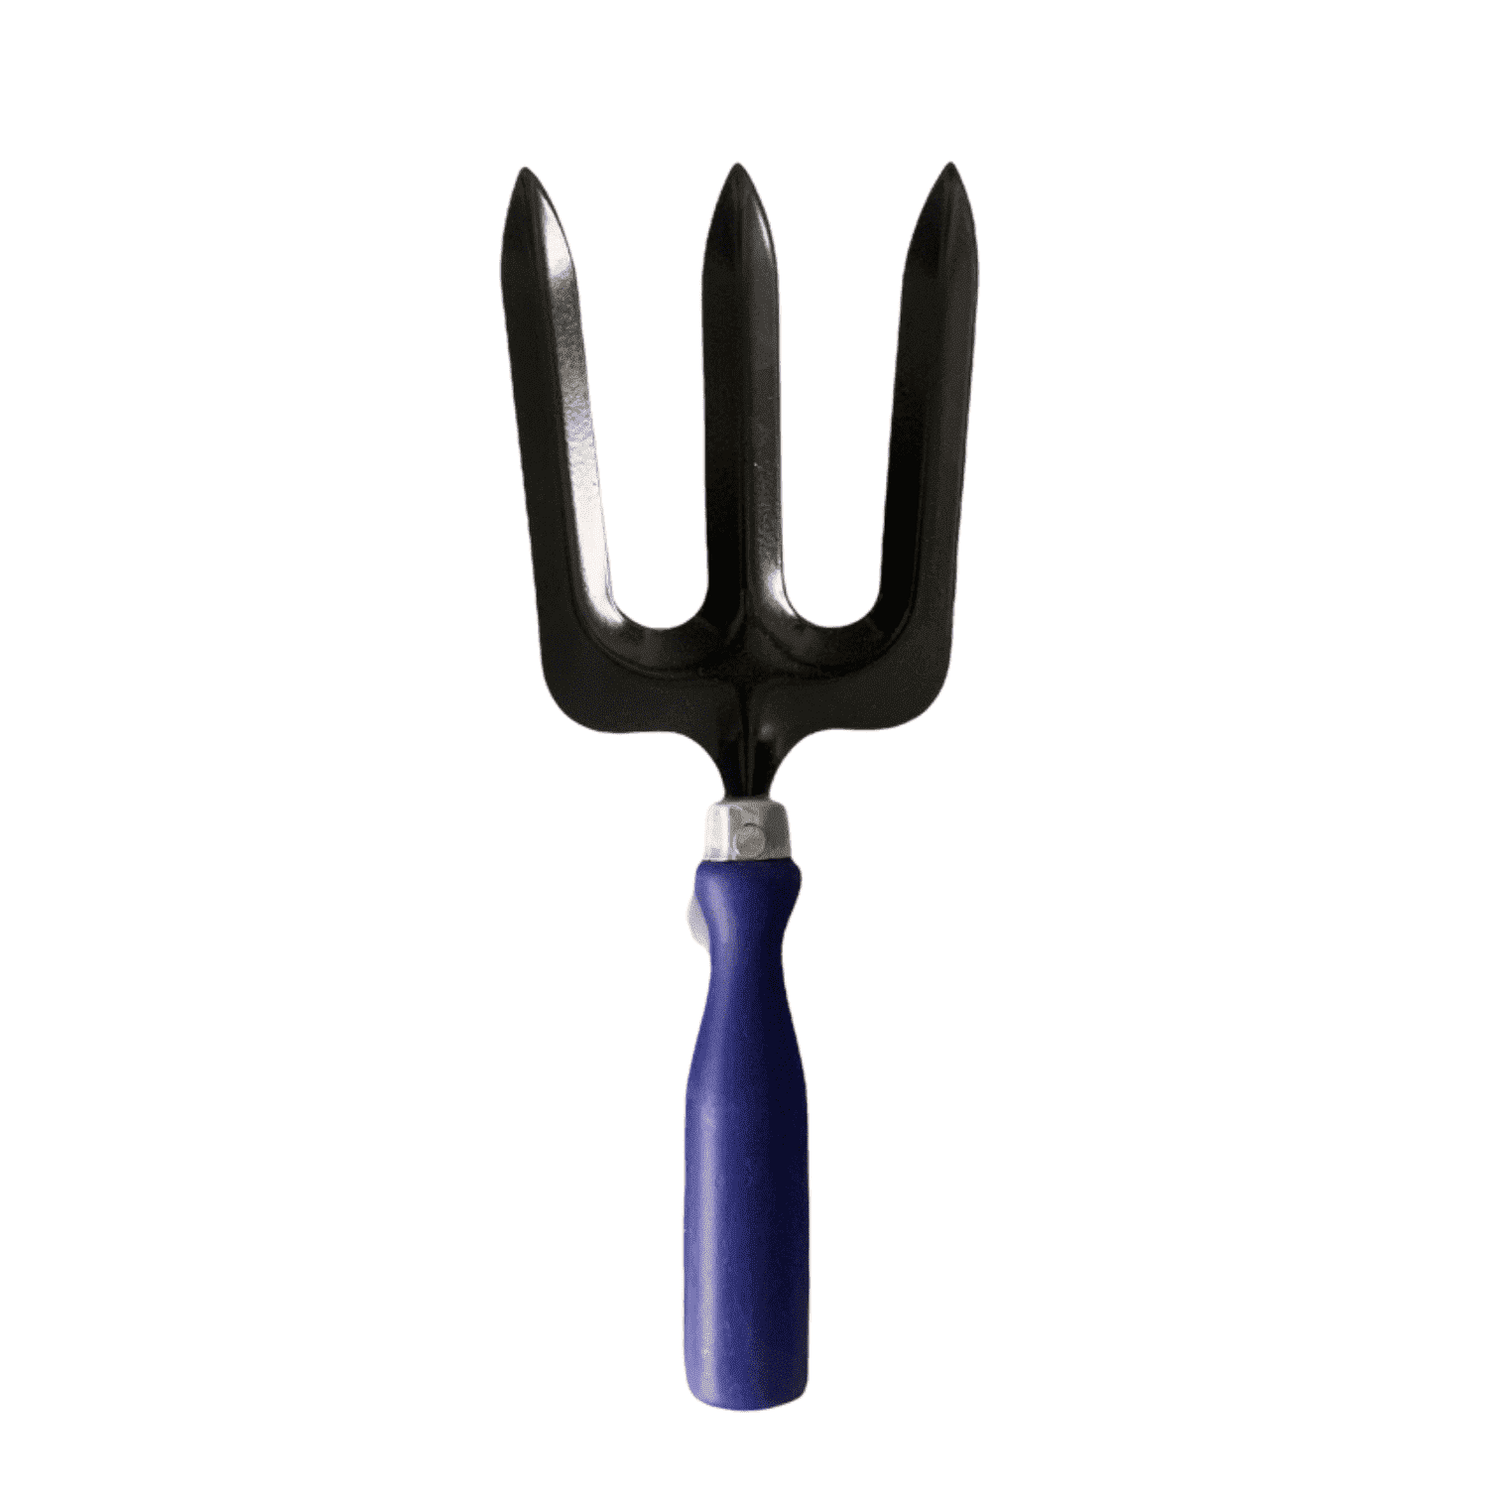 Fork with Plastic Handle - Essential Gardening Tool